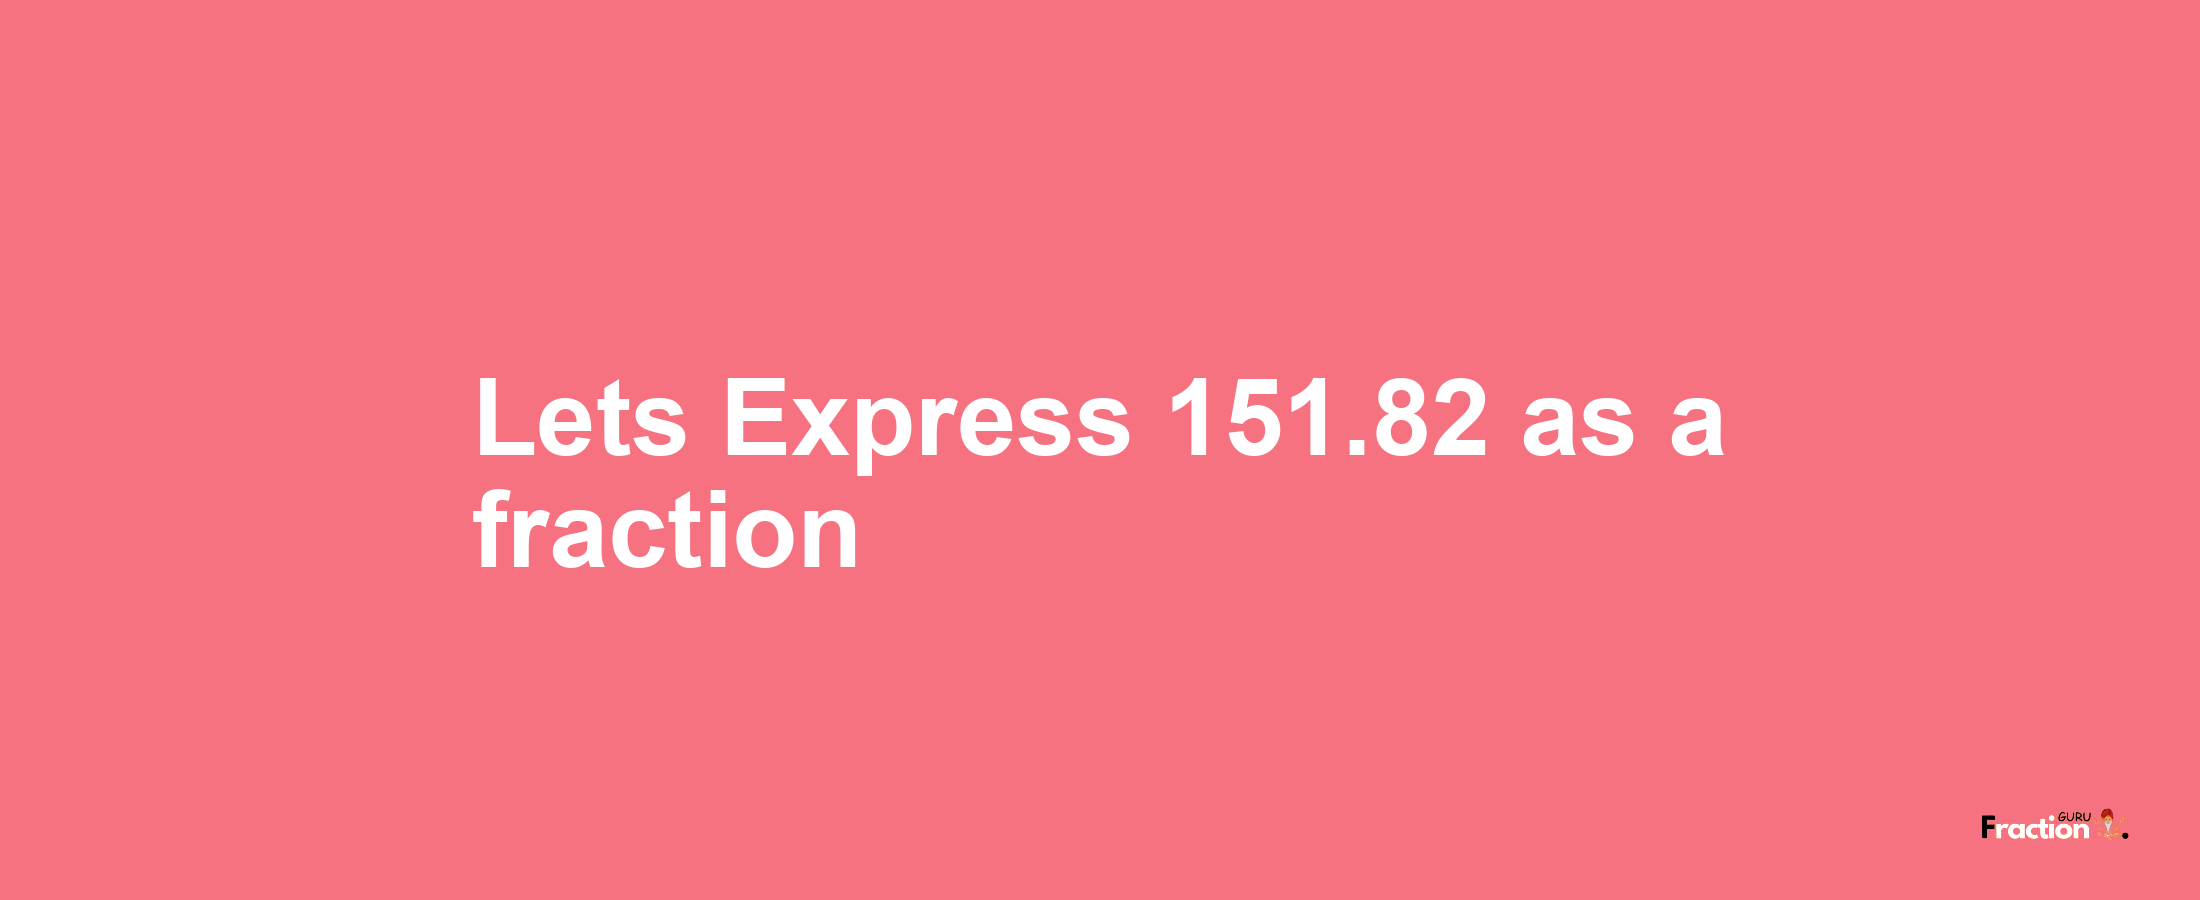 Lets Express 151.82 as afraction